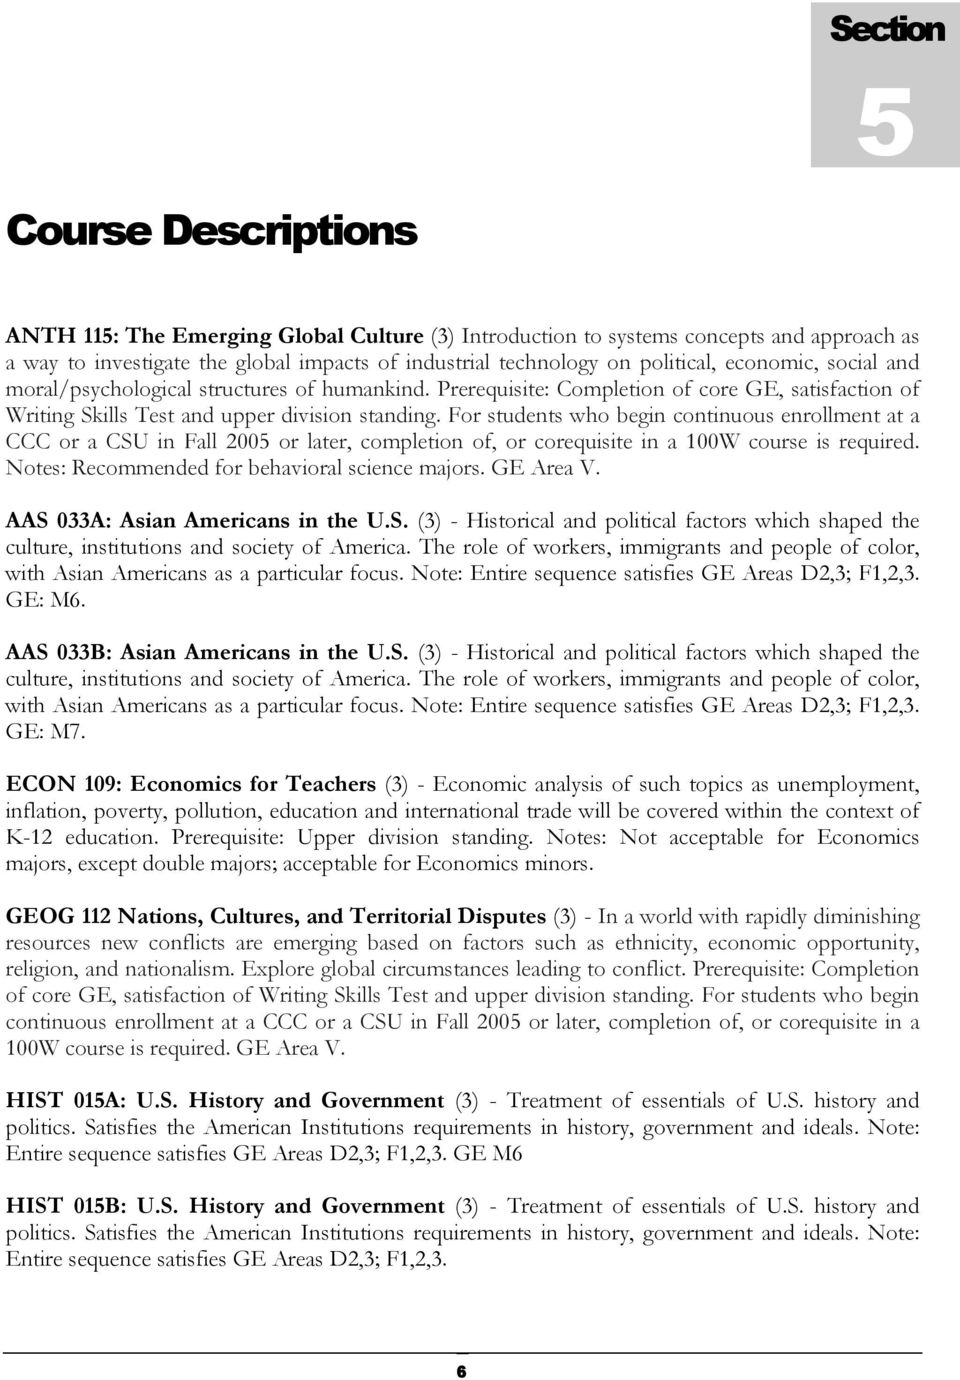 For students who begin continuous enrollment at a CCC or a CSU in Fall 2005 or later, completion of, or corequisite in a 100W course is required. Notes: Recommended for behavioral science majors.